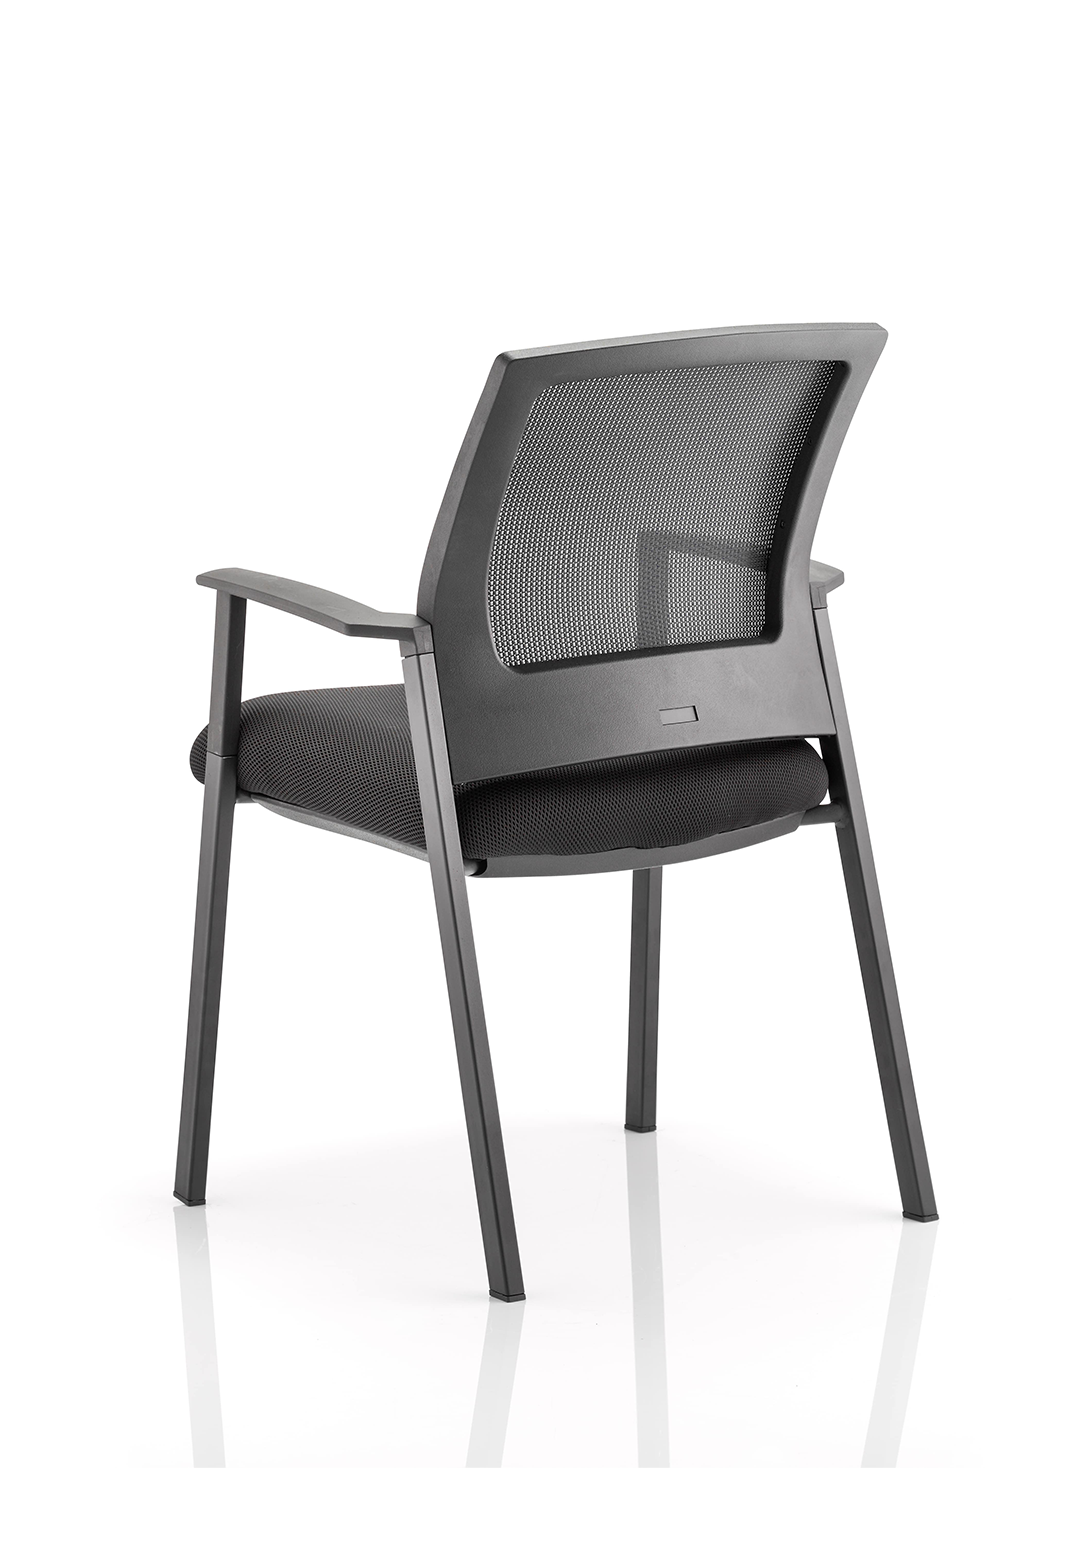 Metro Medium Mesh Back Stacking Visitor Chair with Arms